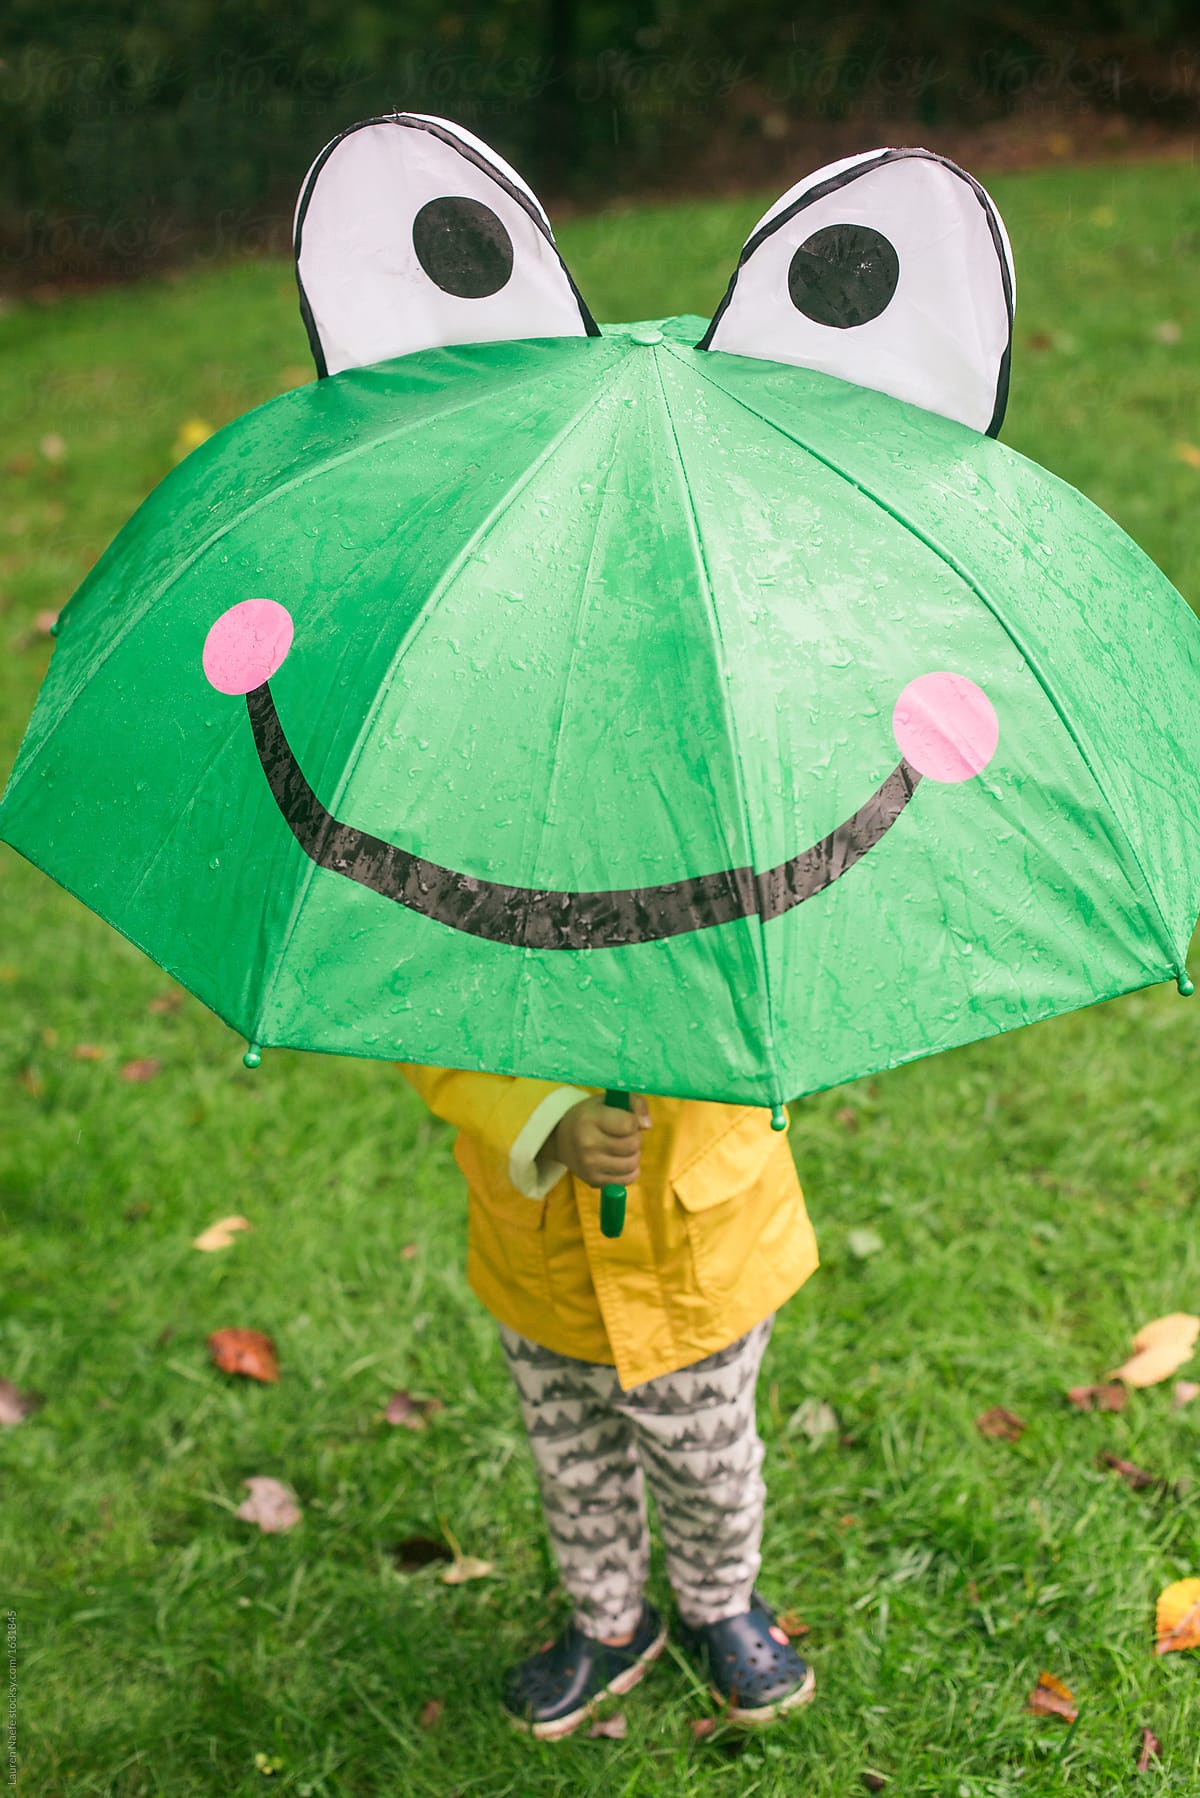 Little kid playing in the rain with umbrella